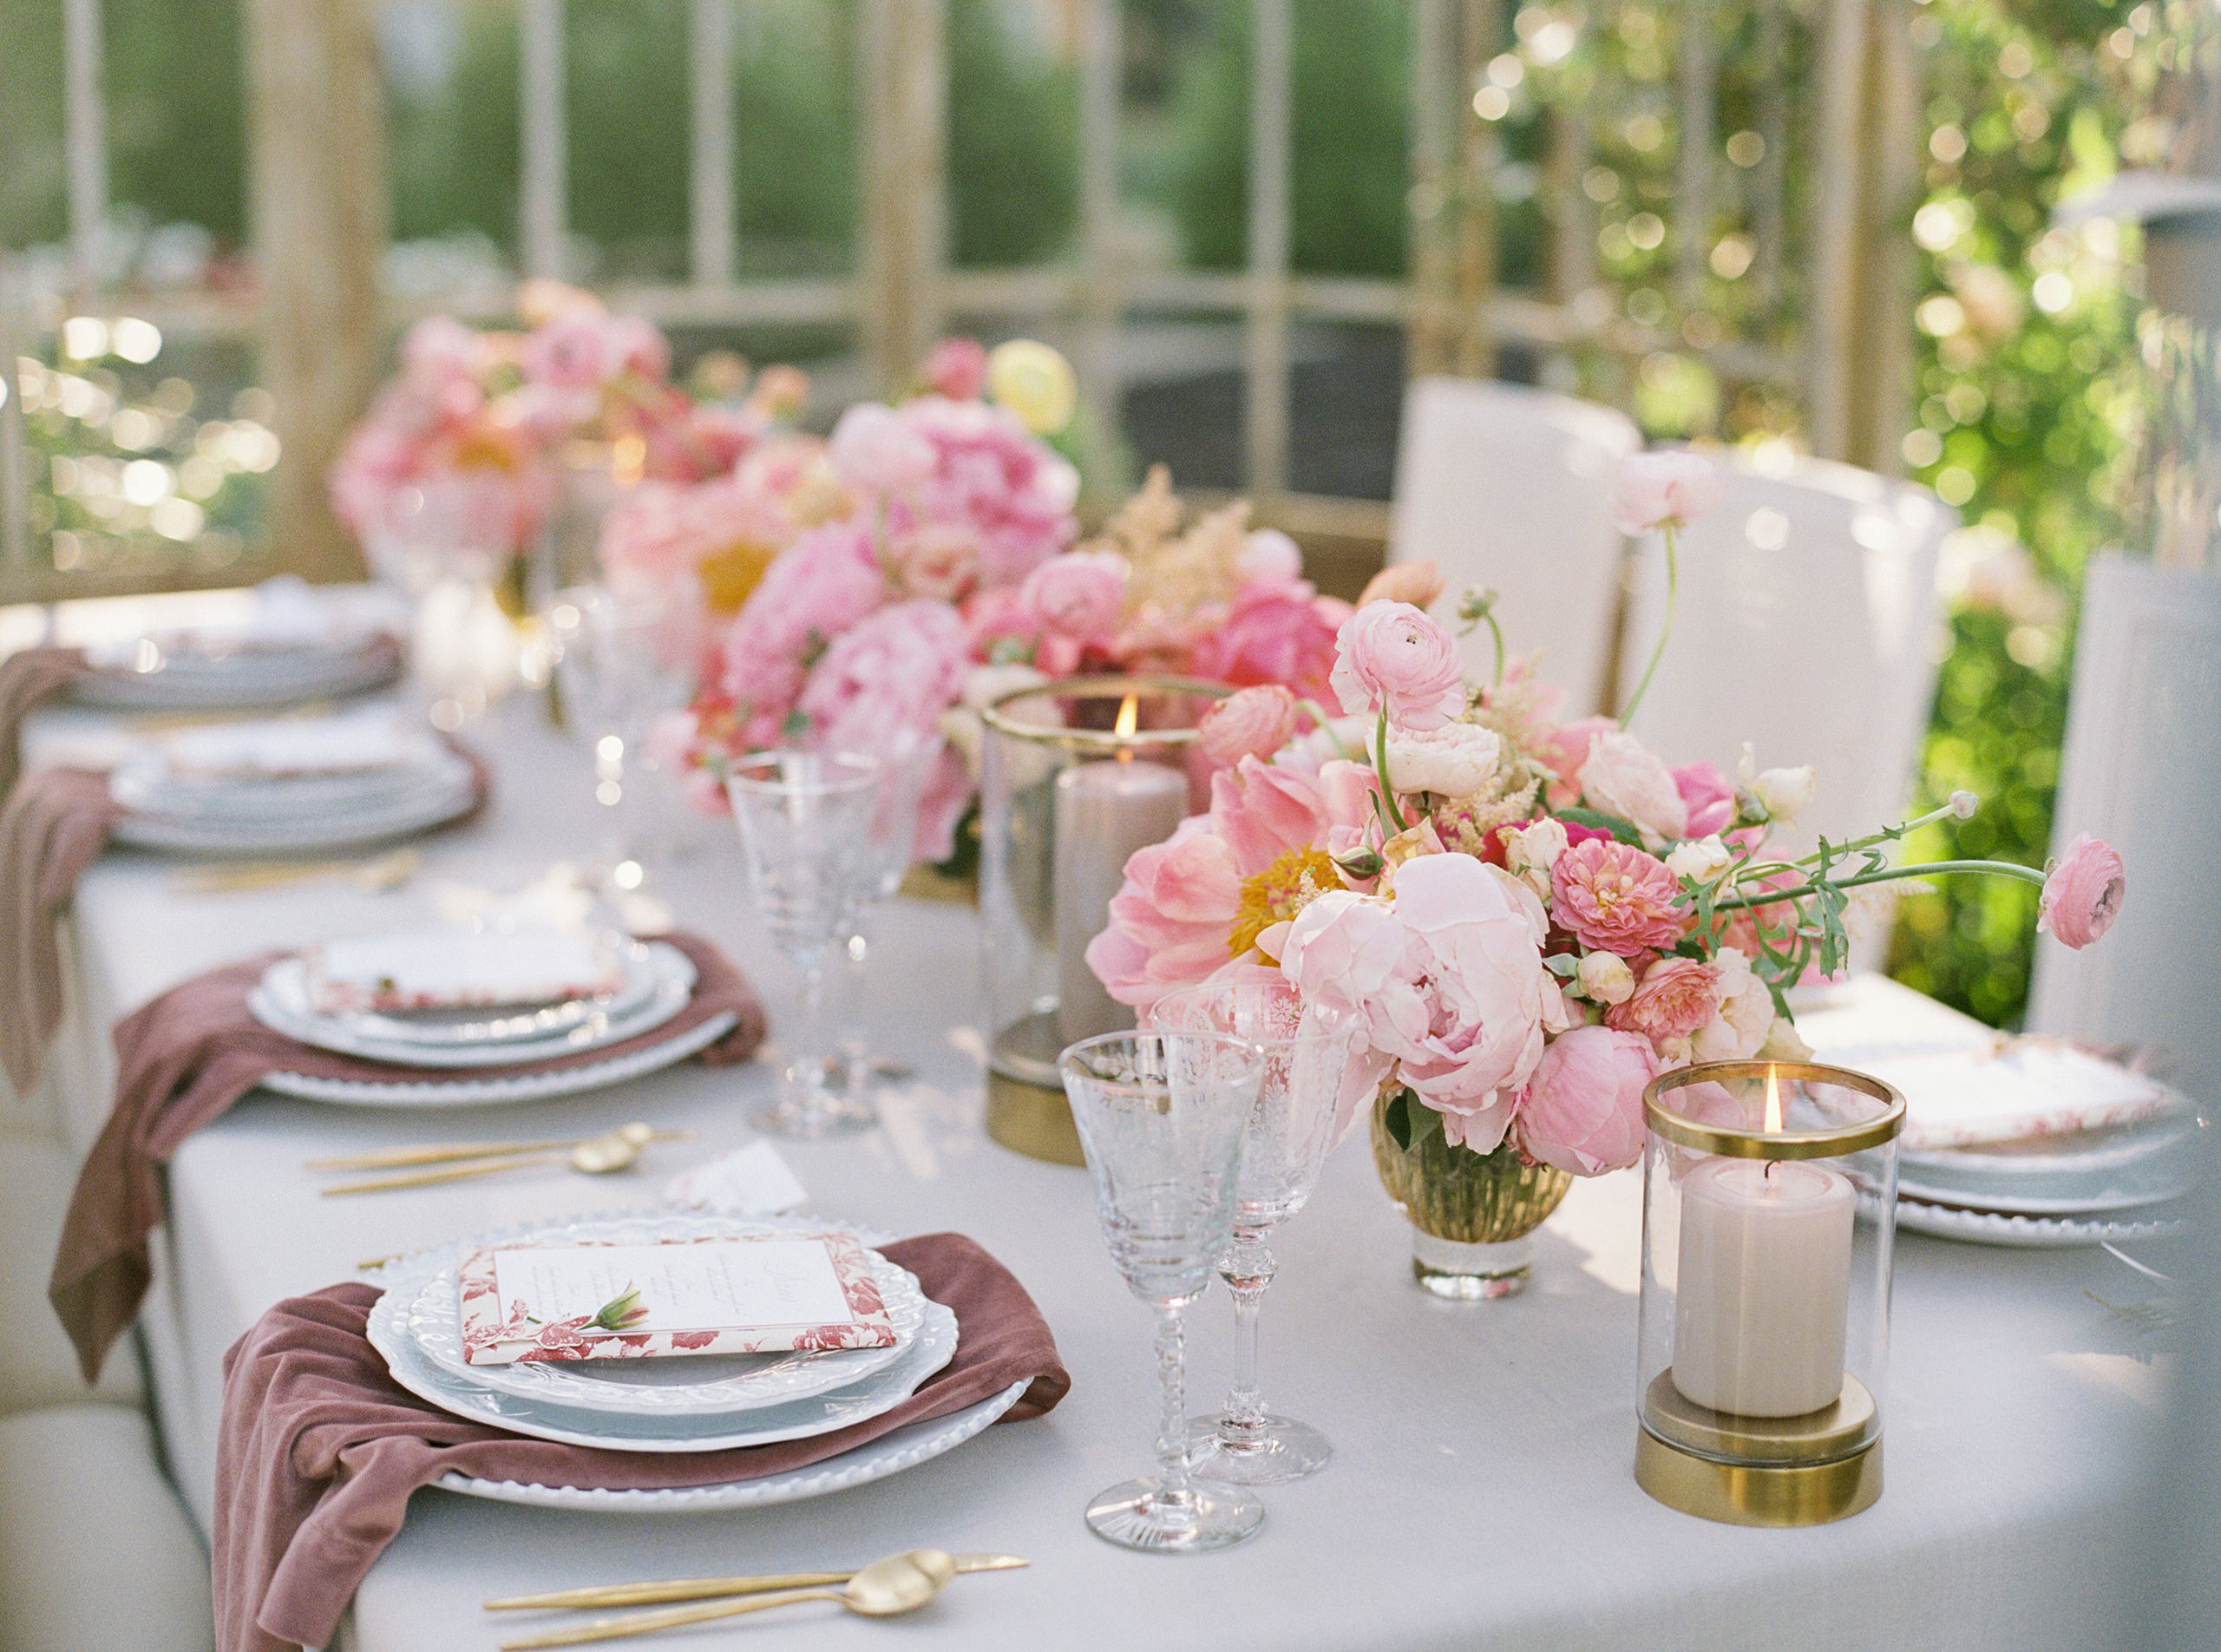 Beautiful outdoor tablescape for wedding with pink garden roses. Photographed on film by Chicago based destination wedding photographer Sarah Sunstrom Photography.